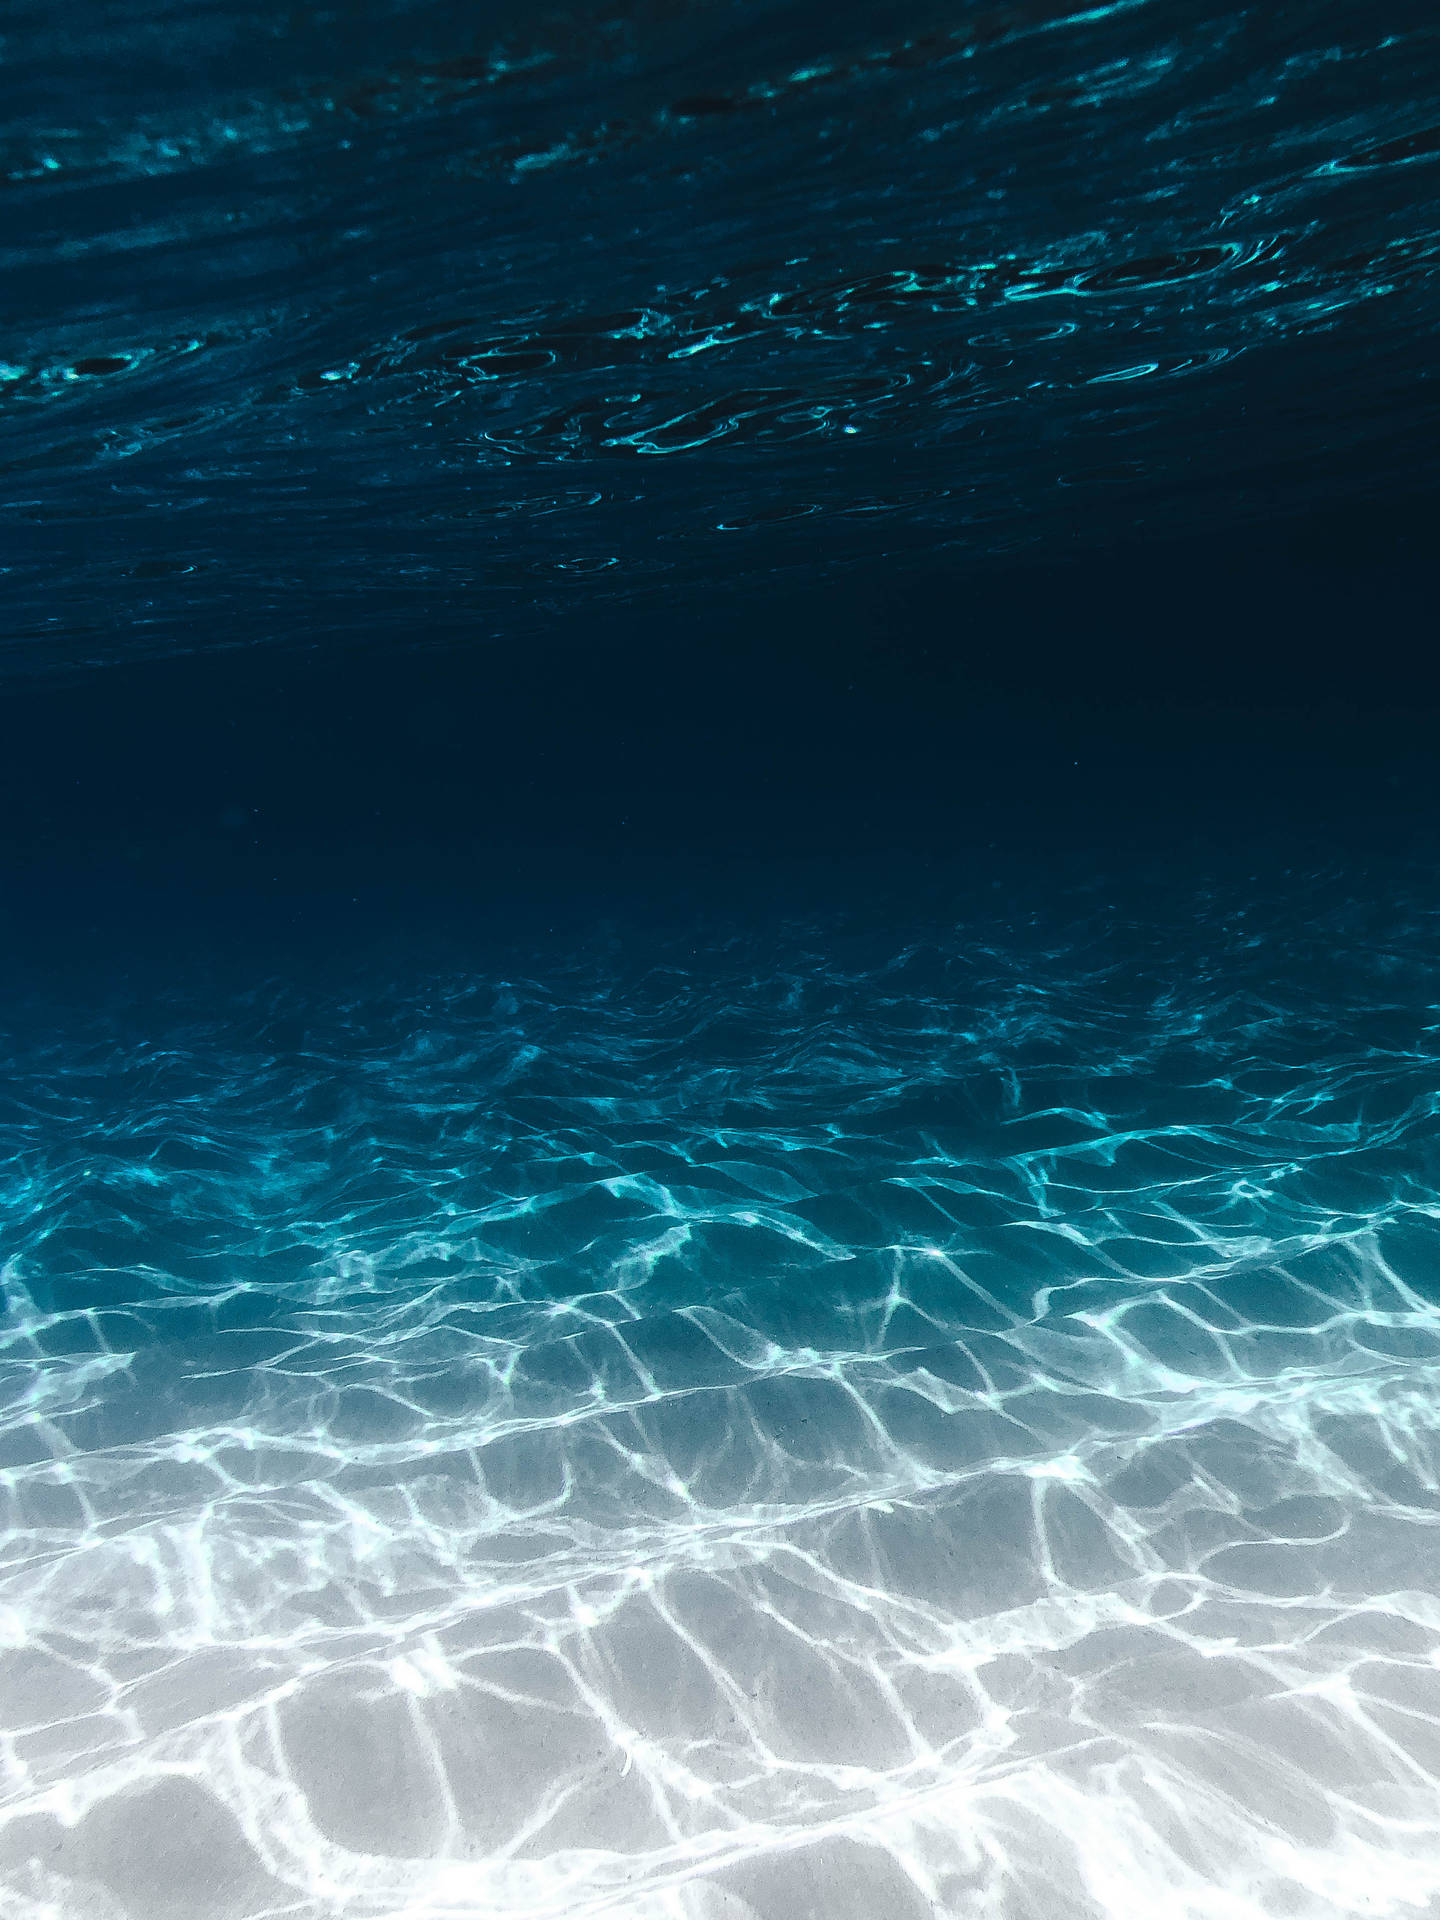 Underwater 2878X3837 Wallpaper and Background Image